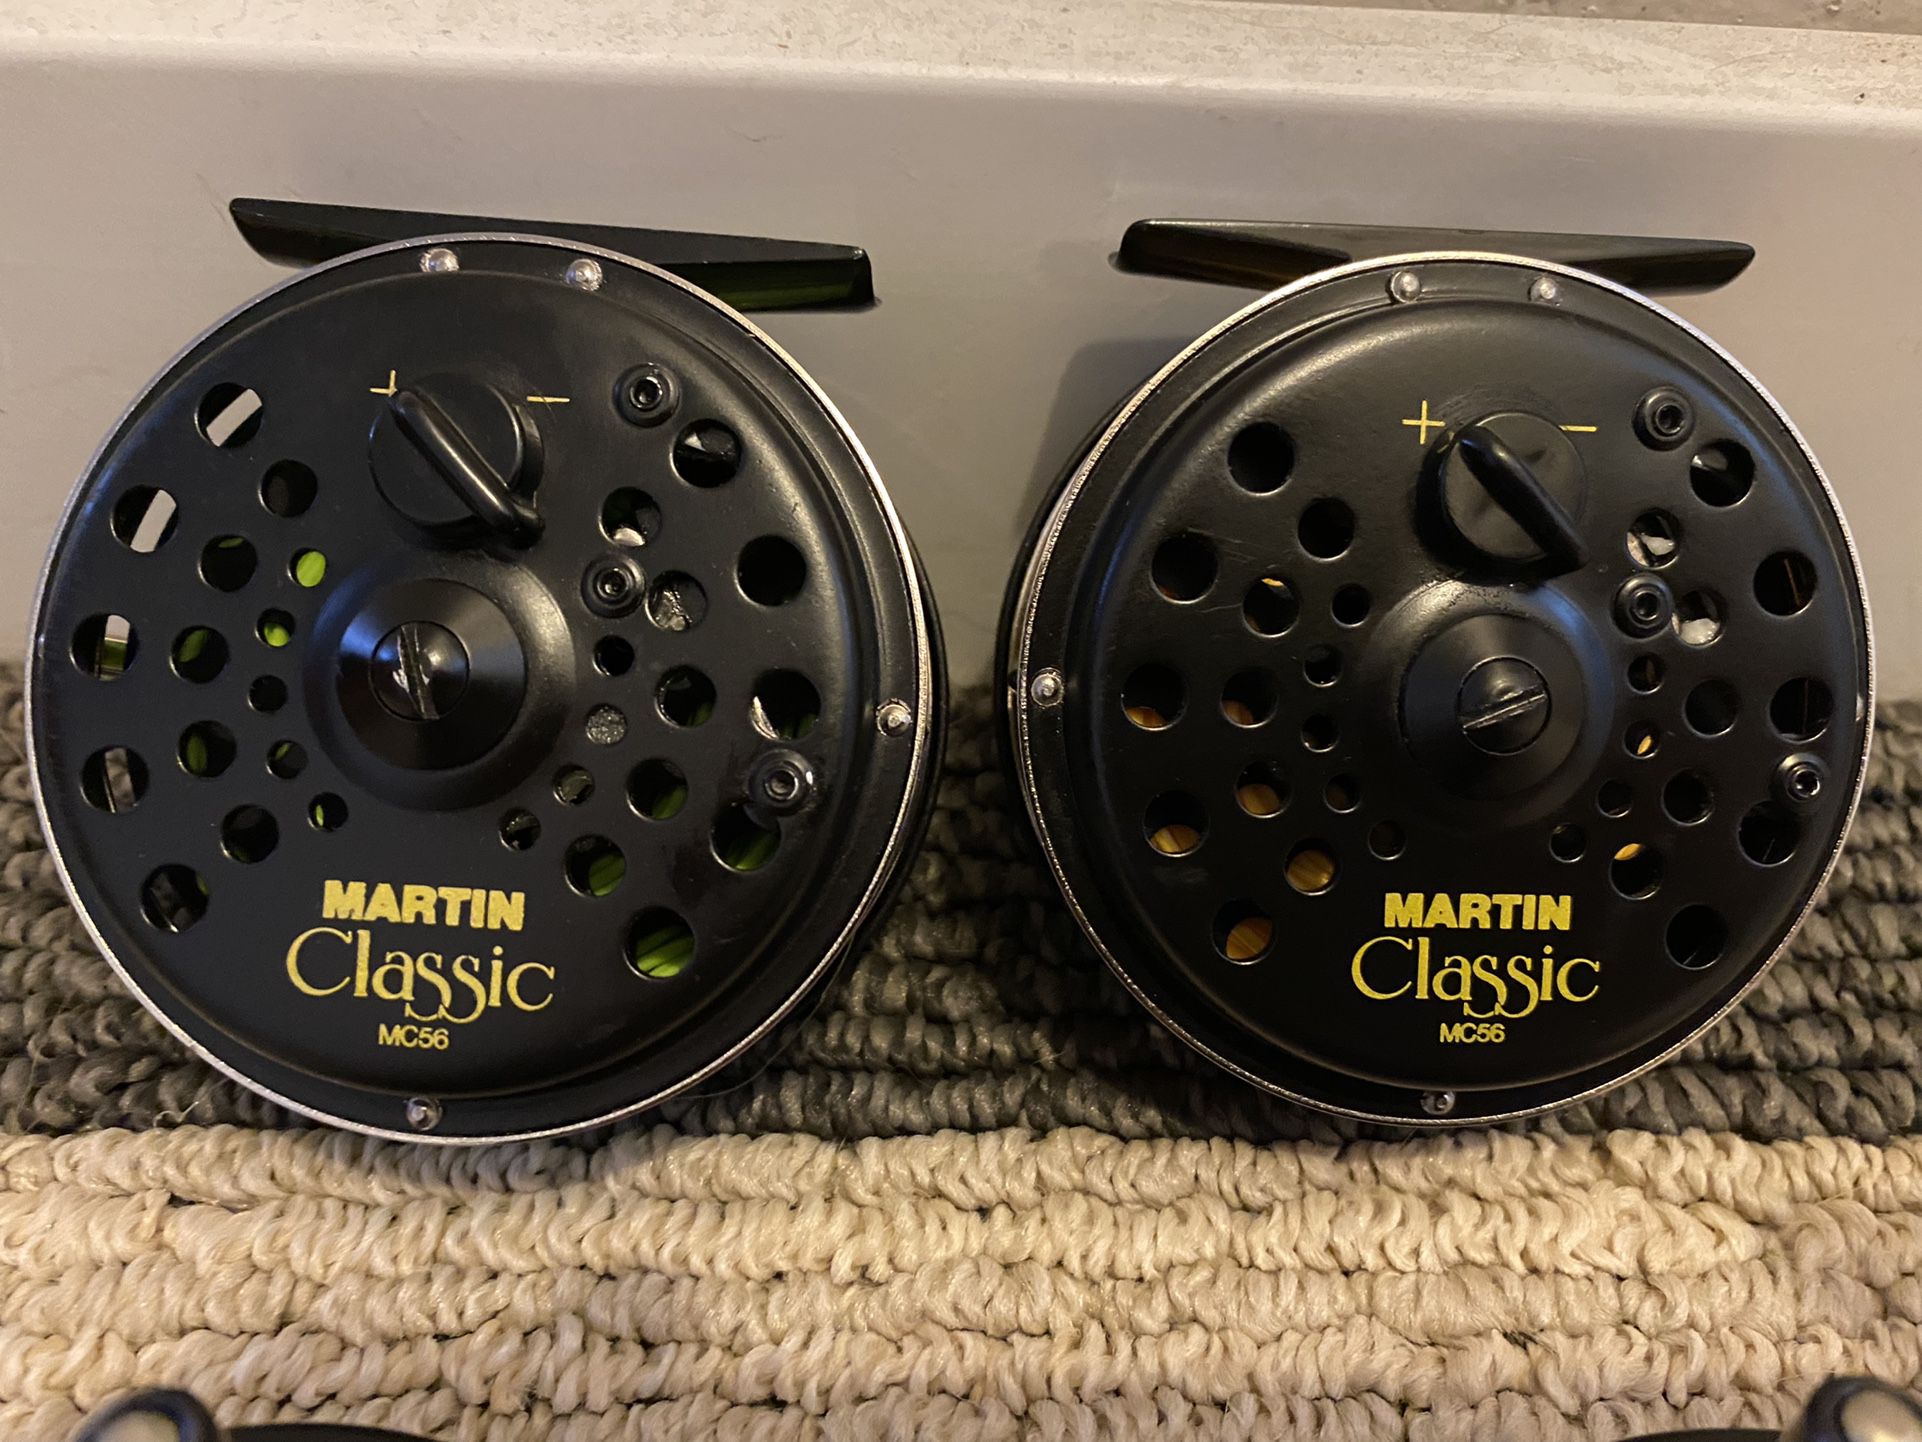 Martin Classic Fly Reels for Sale in Bonney Lake, WA - OfferUp